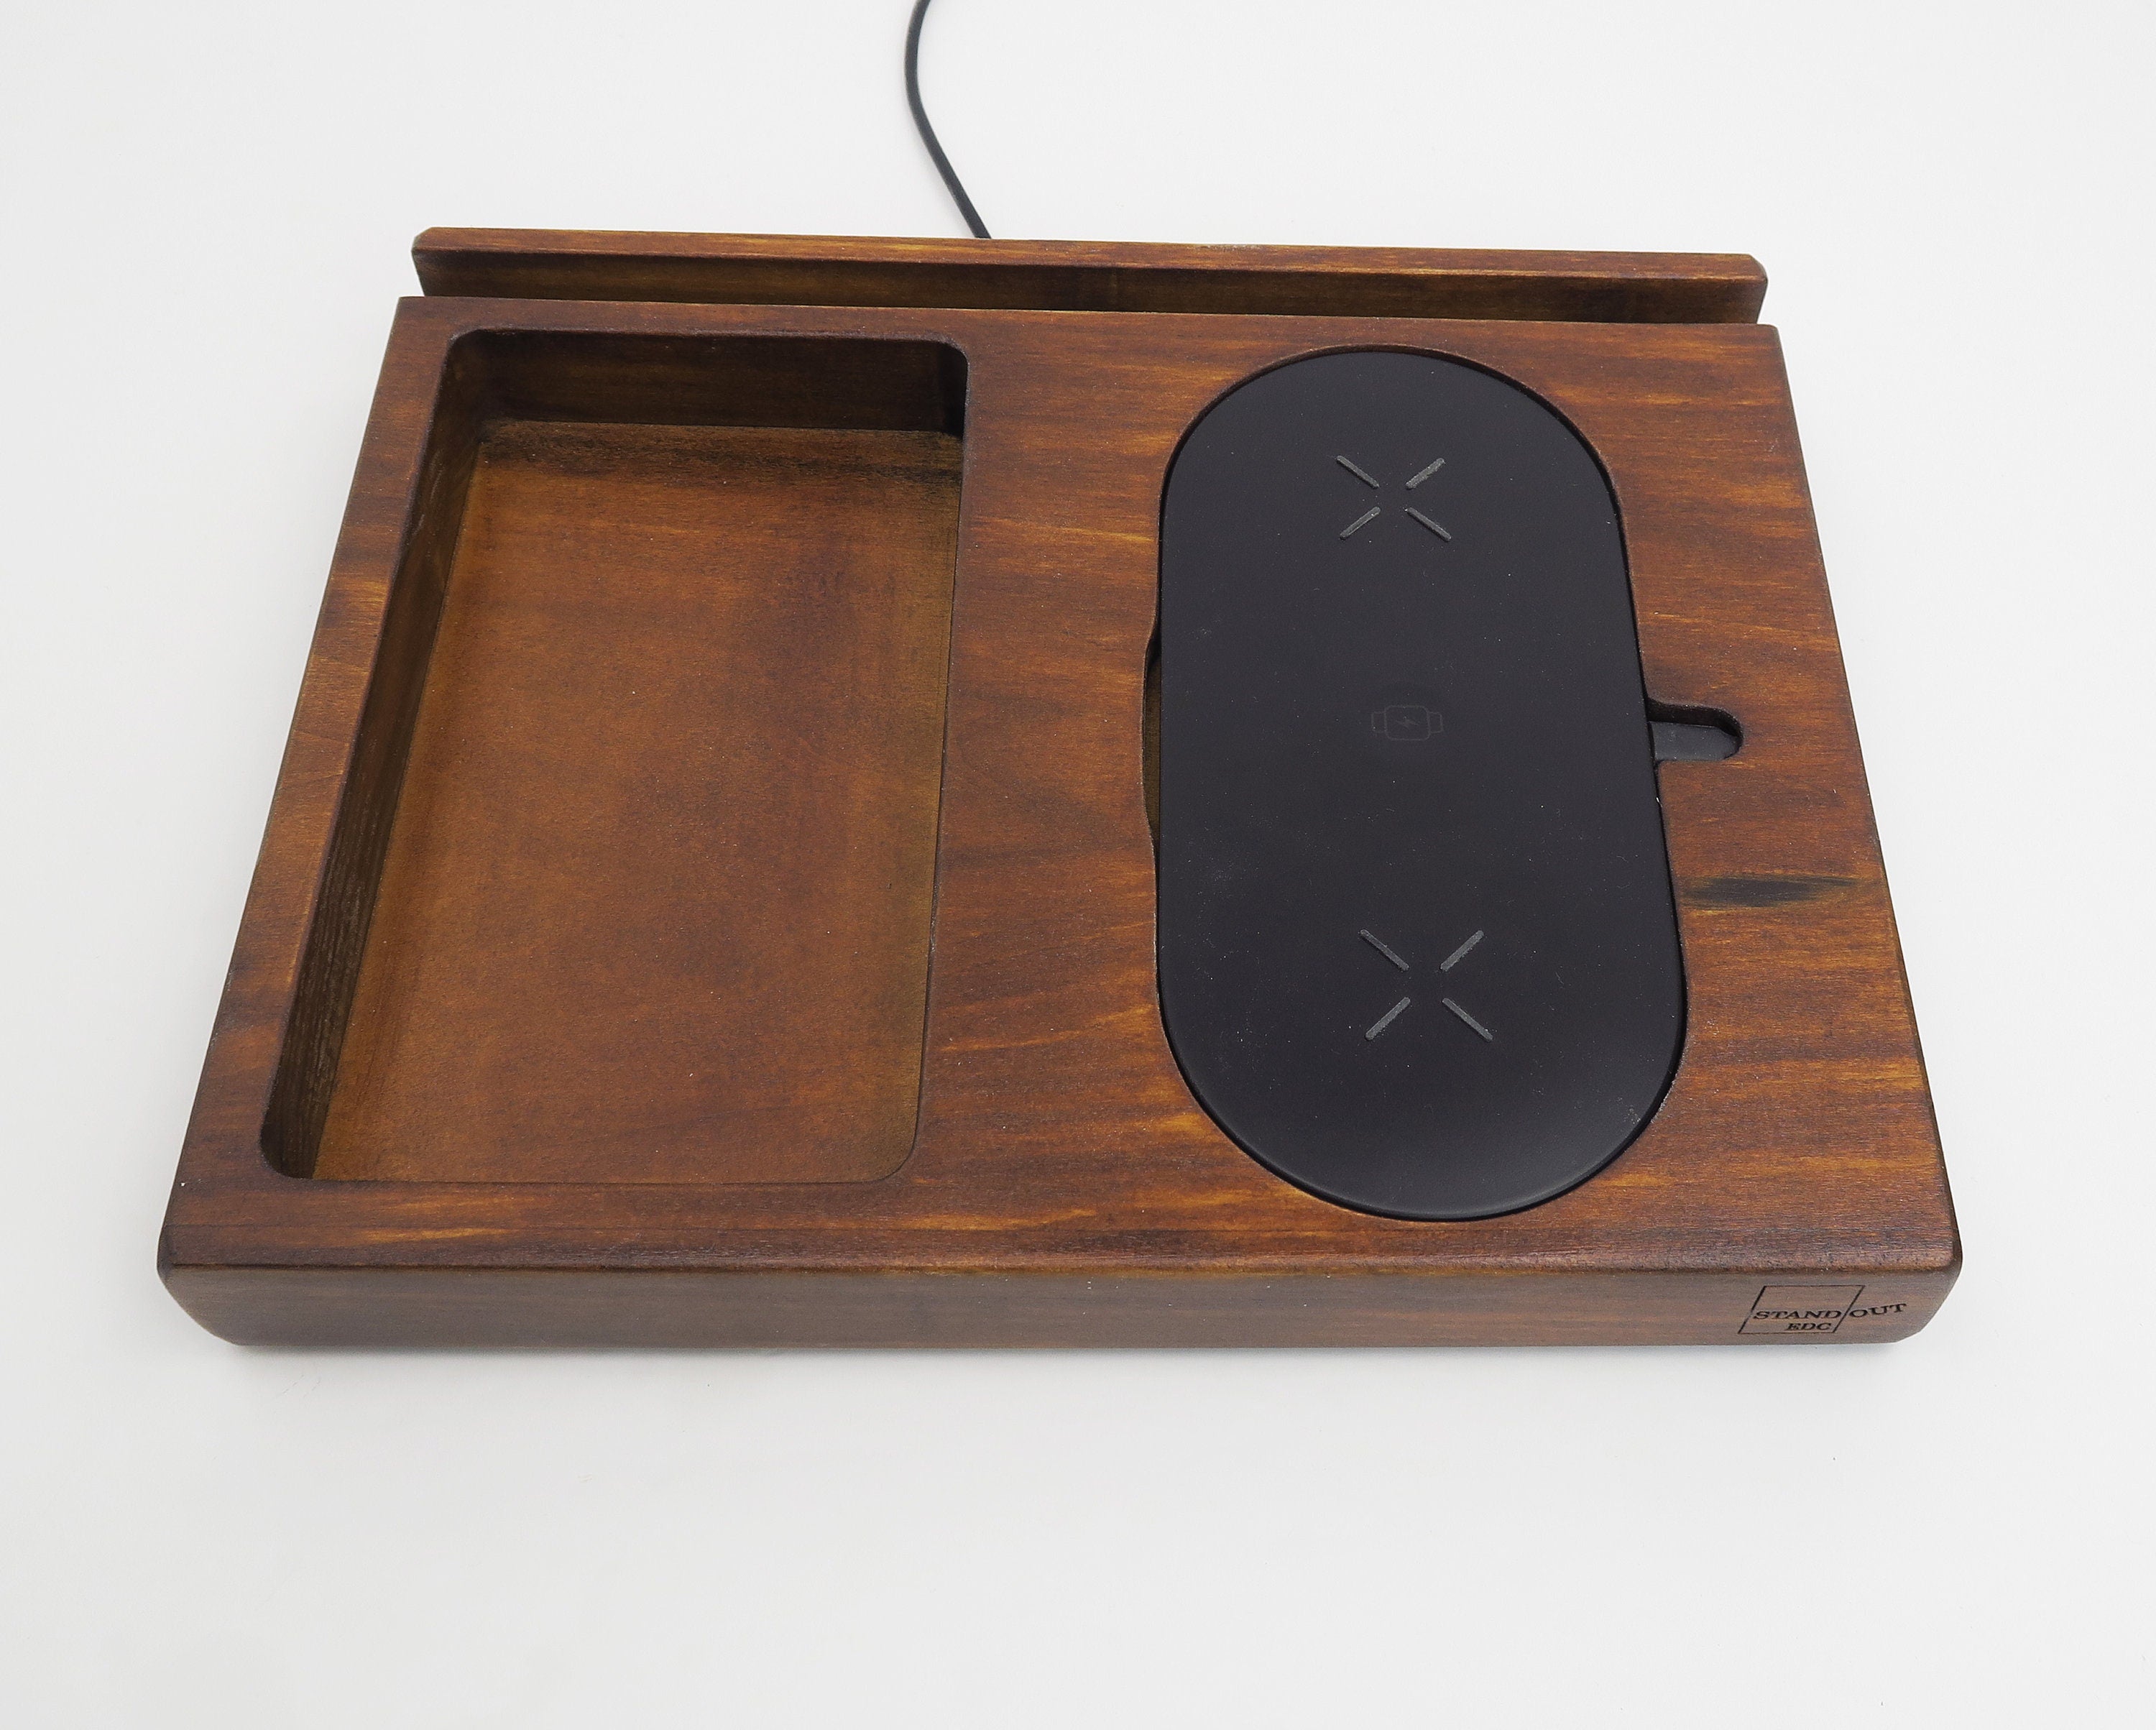 Personalized Gift for Dad, Triple Wireless Charger, Wood Charging Station for Phones-Earbuds-Apple Watch, iPhone and iPad Dock, Gift.